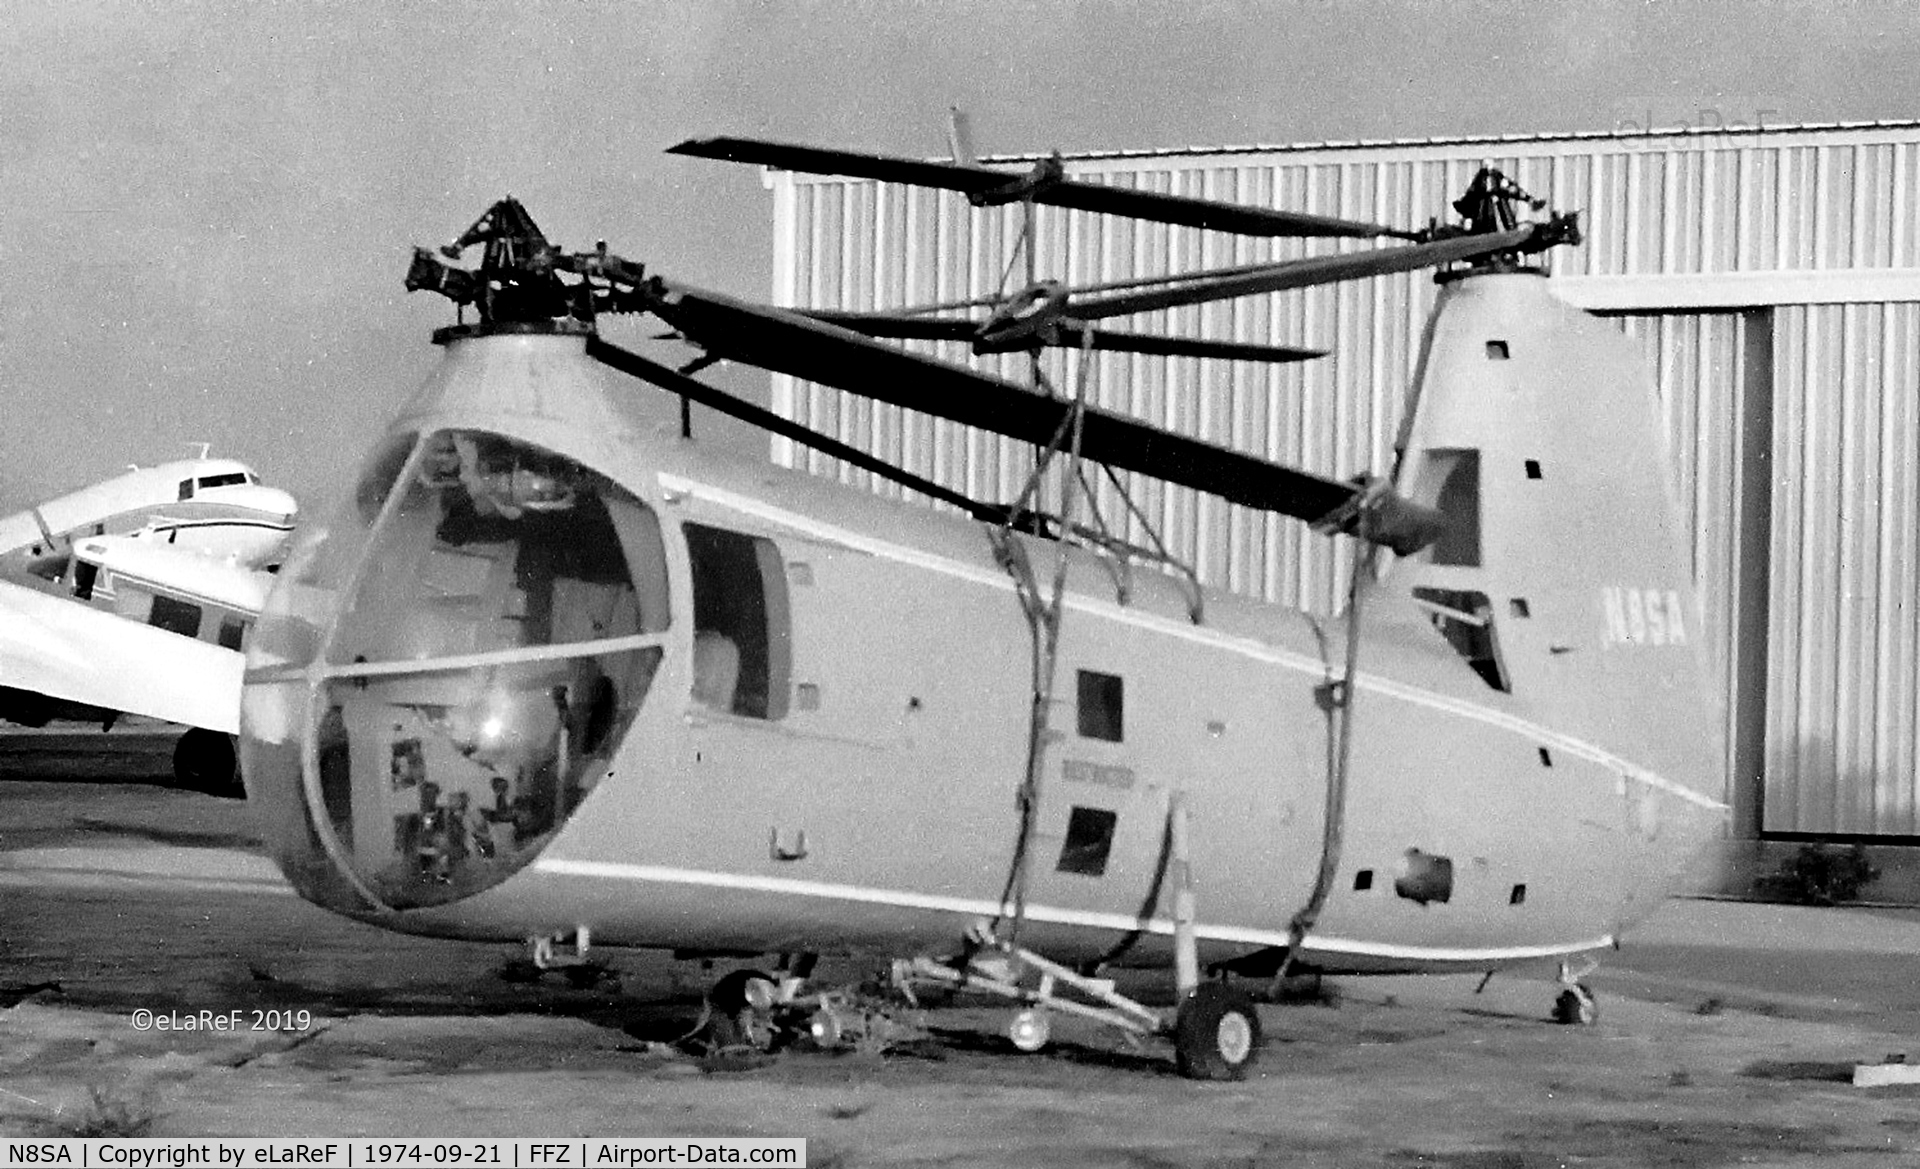 N8SA, Piasecki UH-25B Retriever C/N 128519, One of over 25 H-25s present, although most were ex-USN hulks.Shows the intricate folding gear required